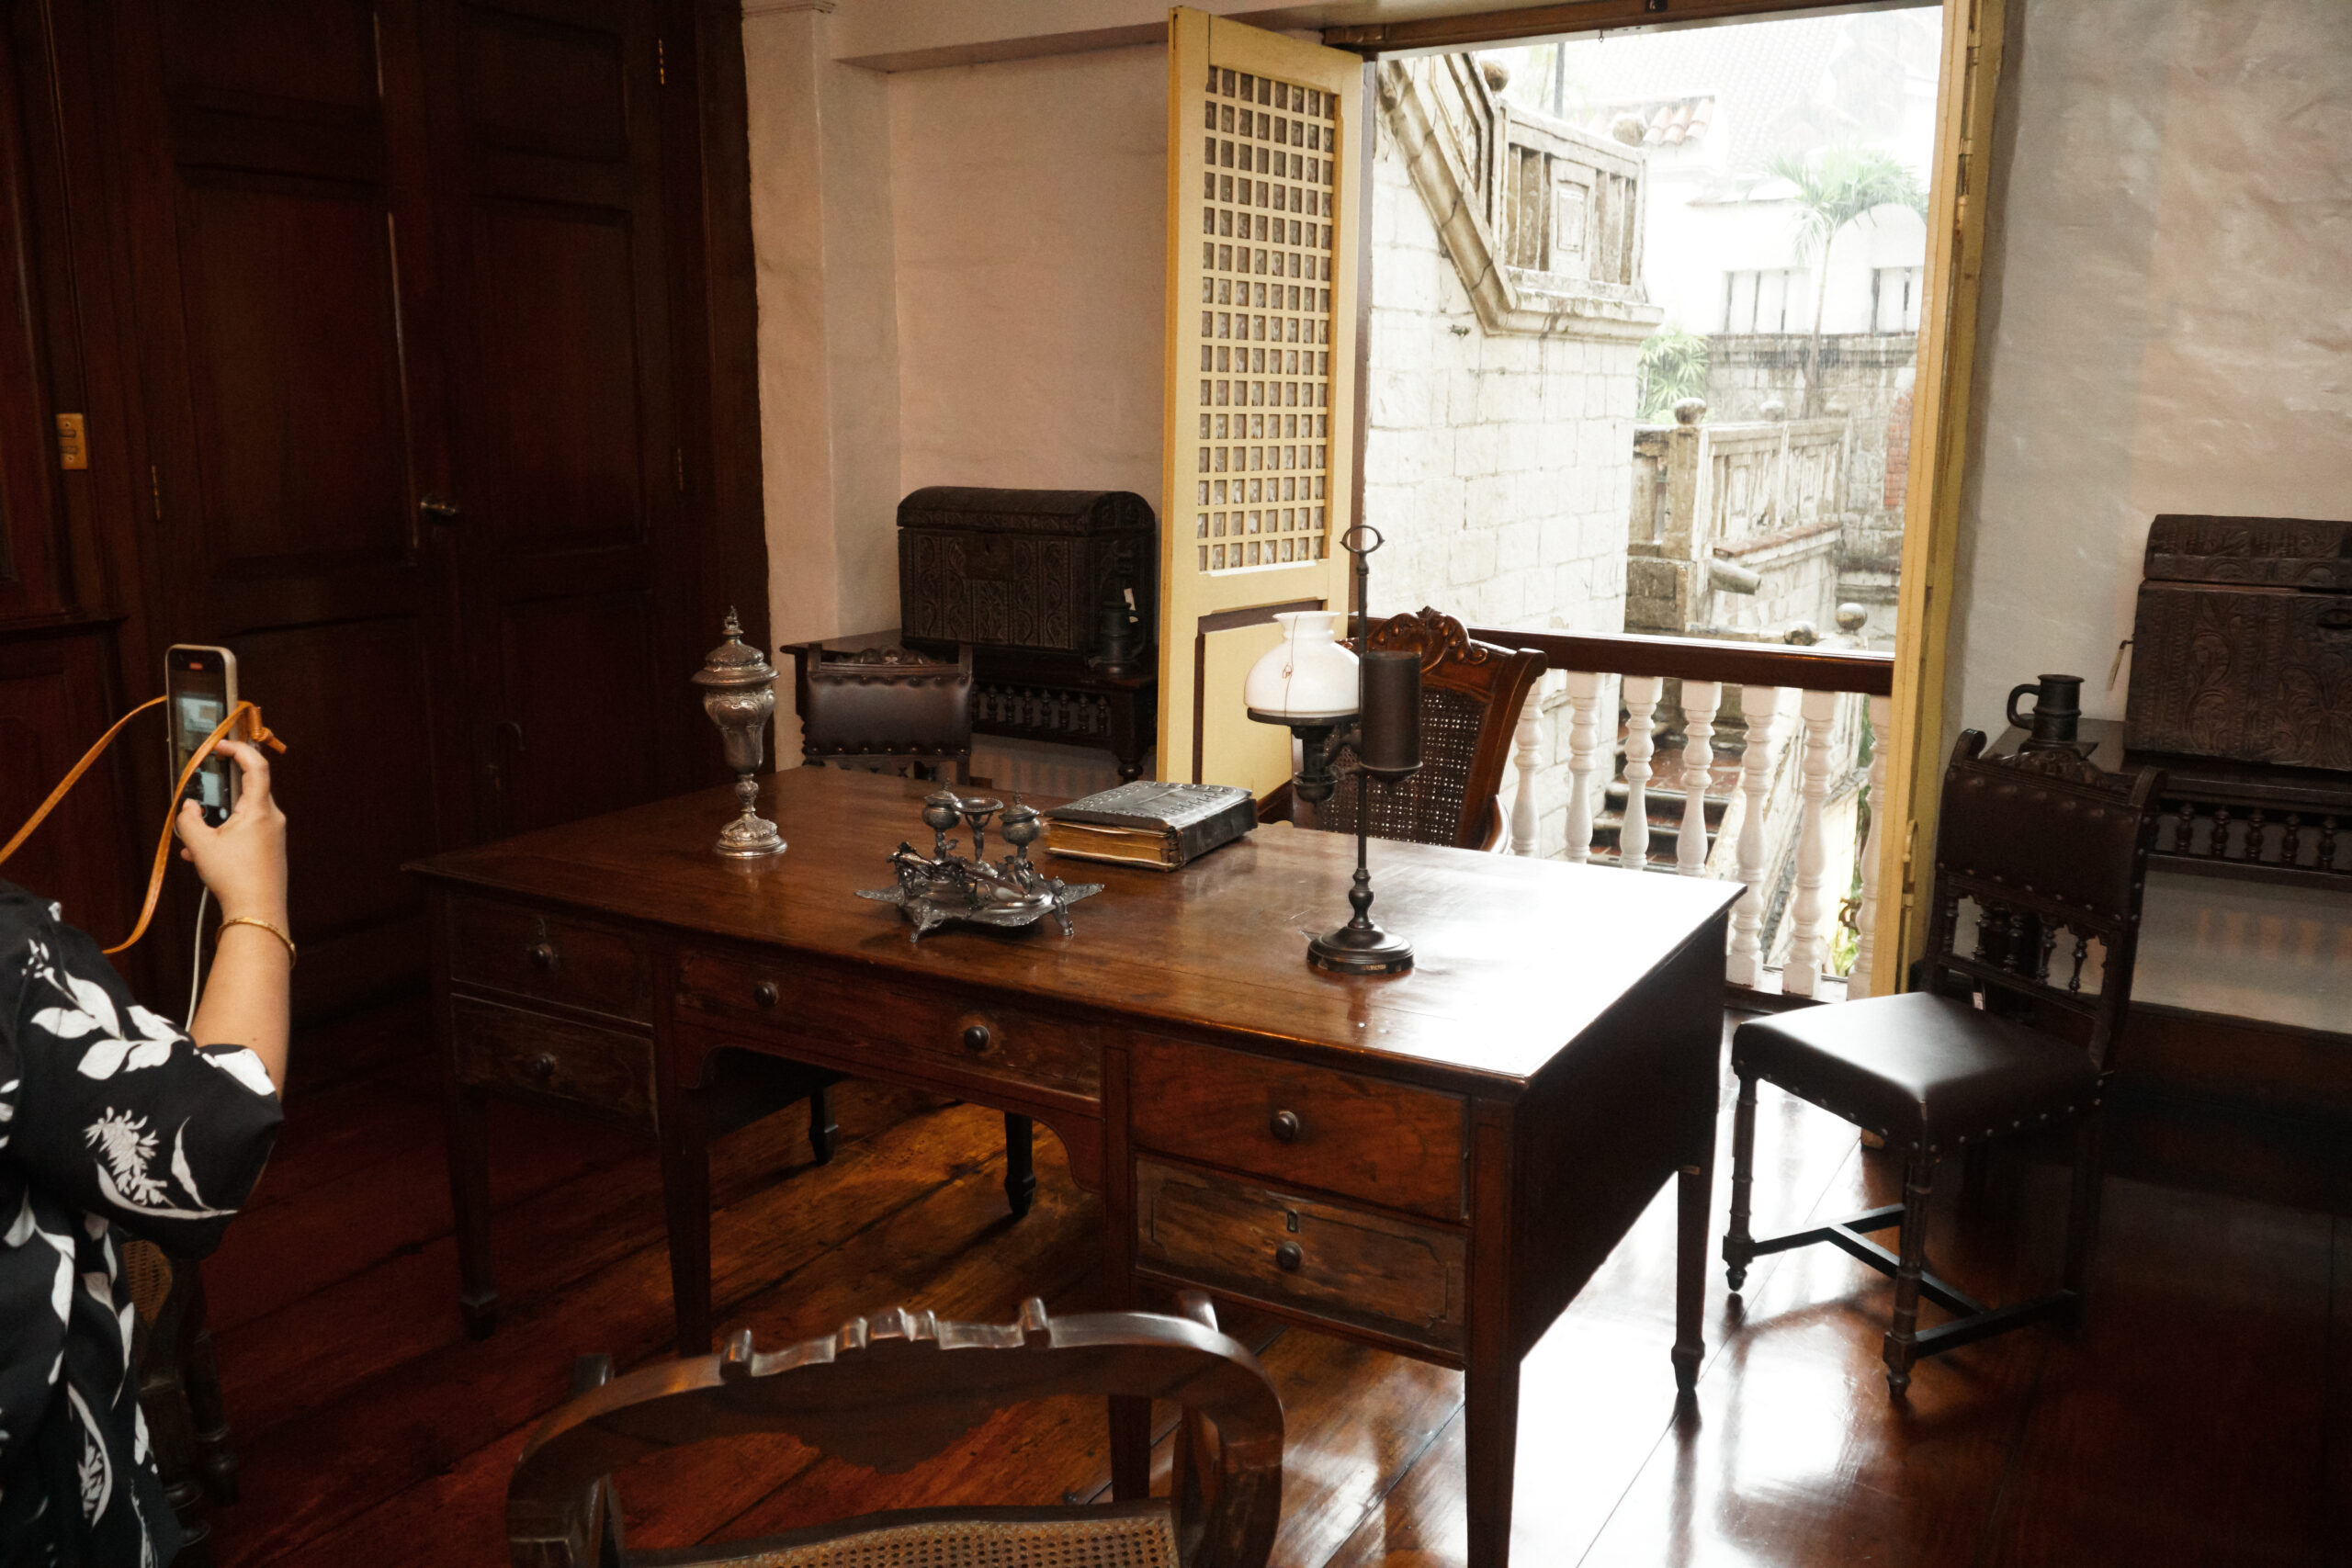 A desk inside the despacho - a room where business was usually conducted